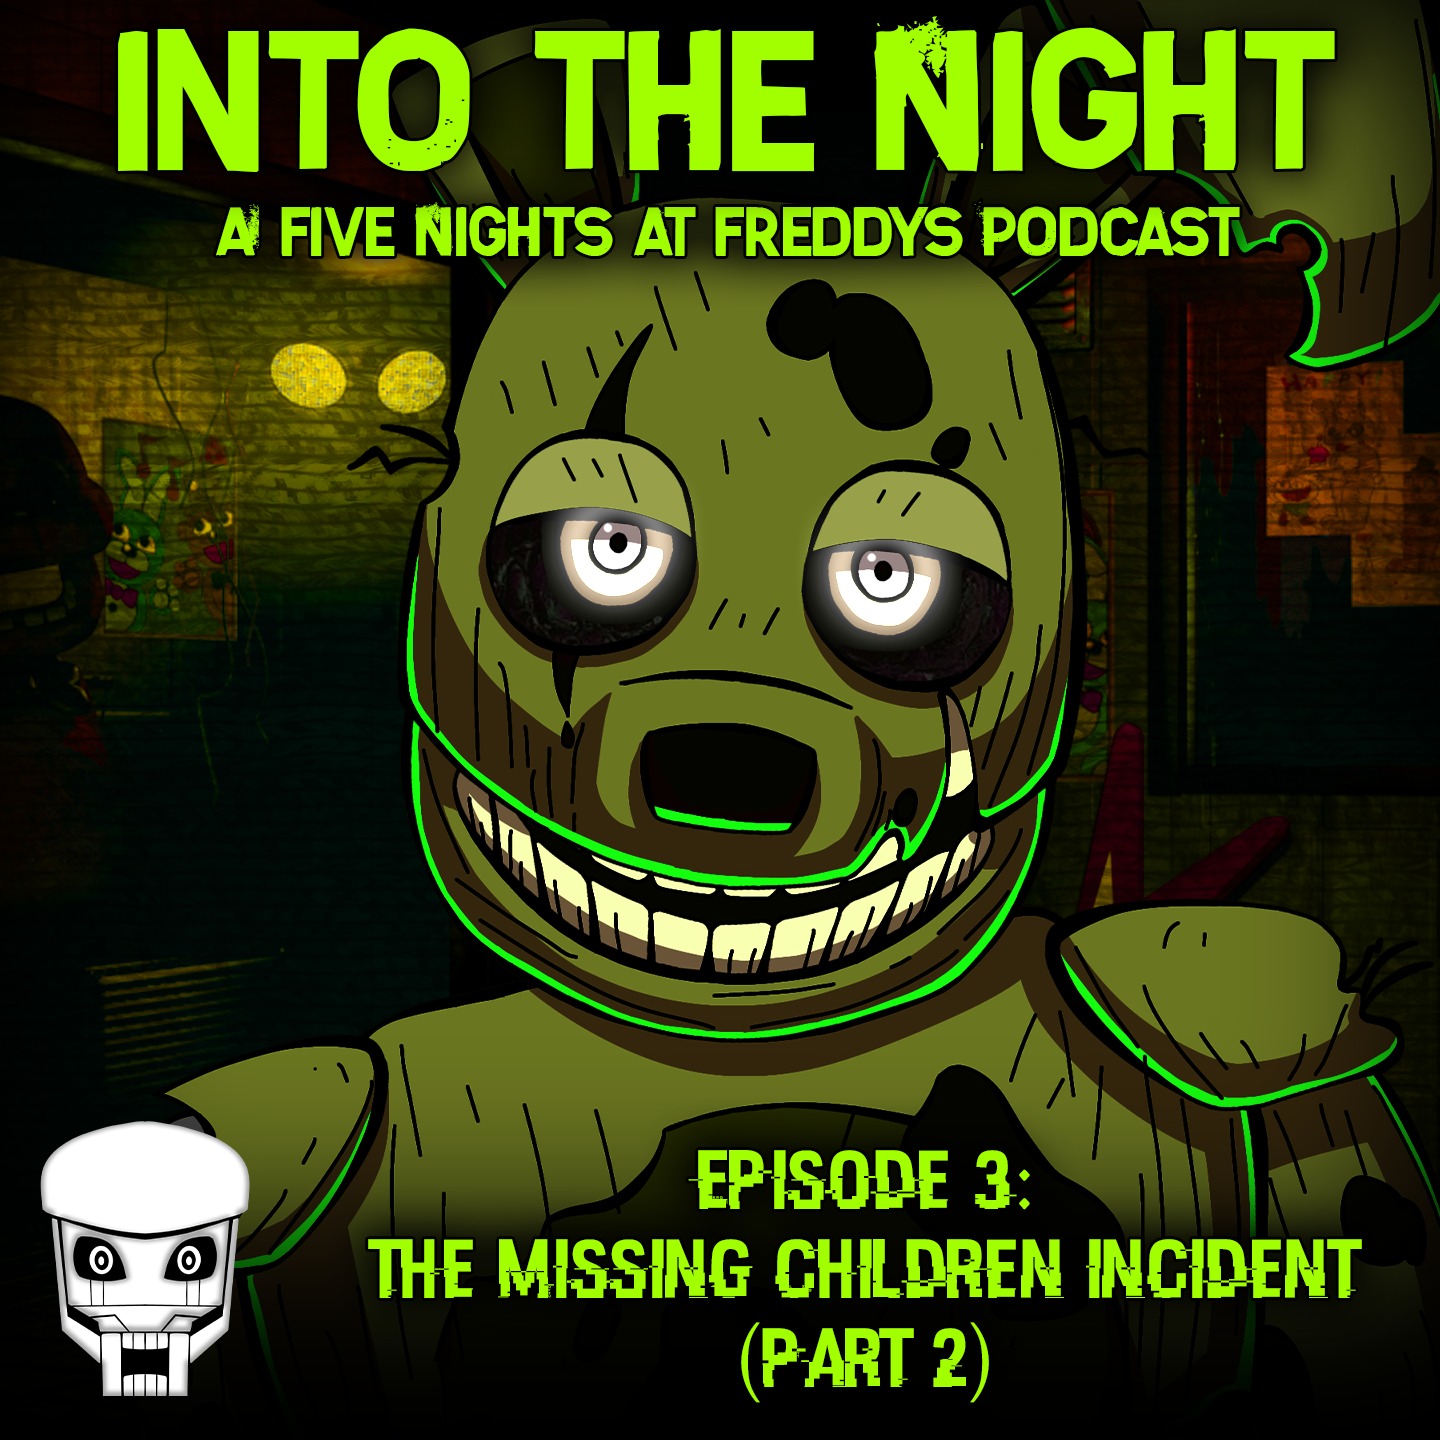 Part_4 Night 1 of Five Nights In Anime 2 New Game New Animatronics